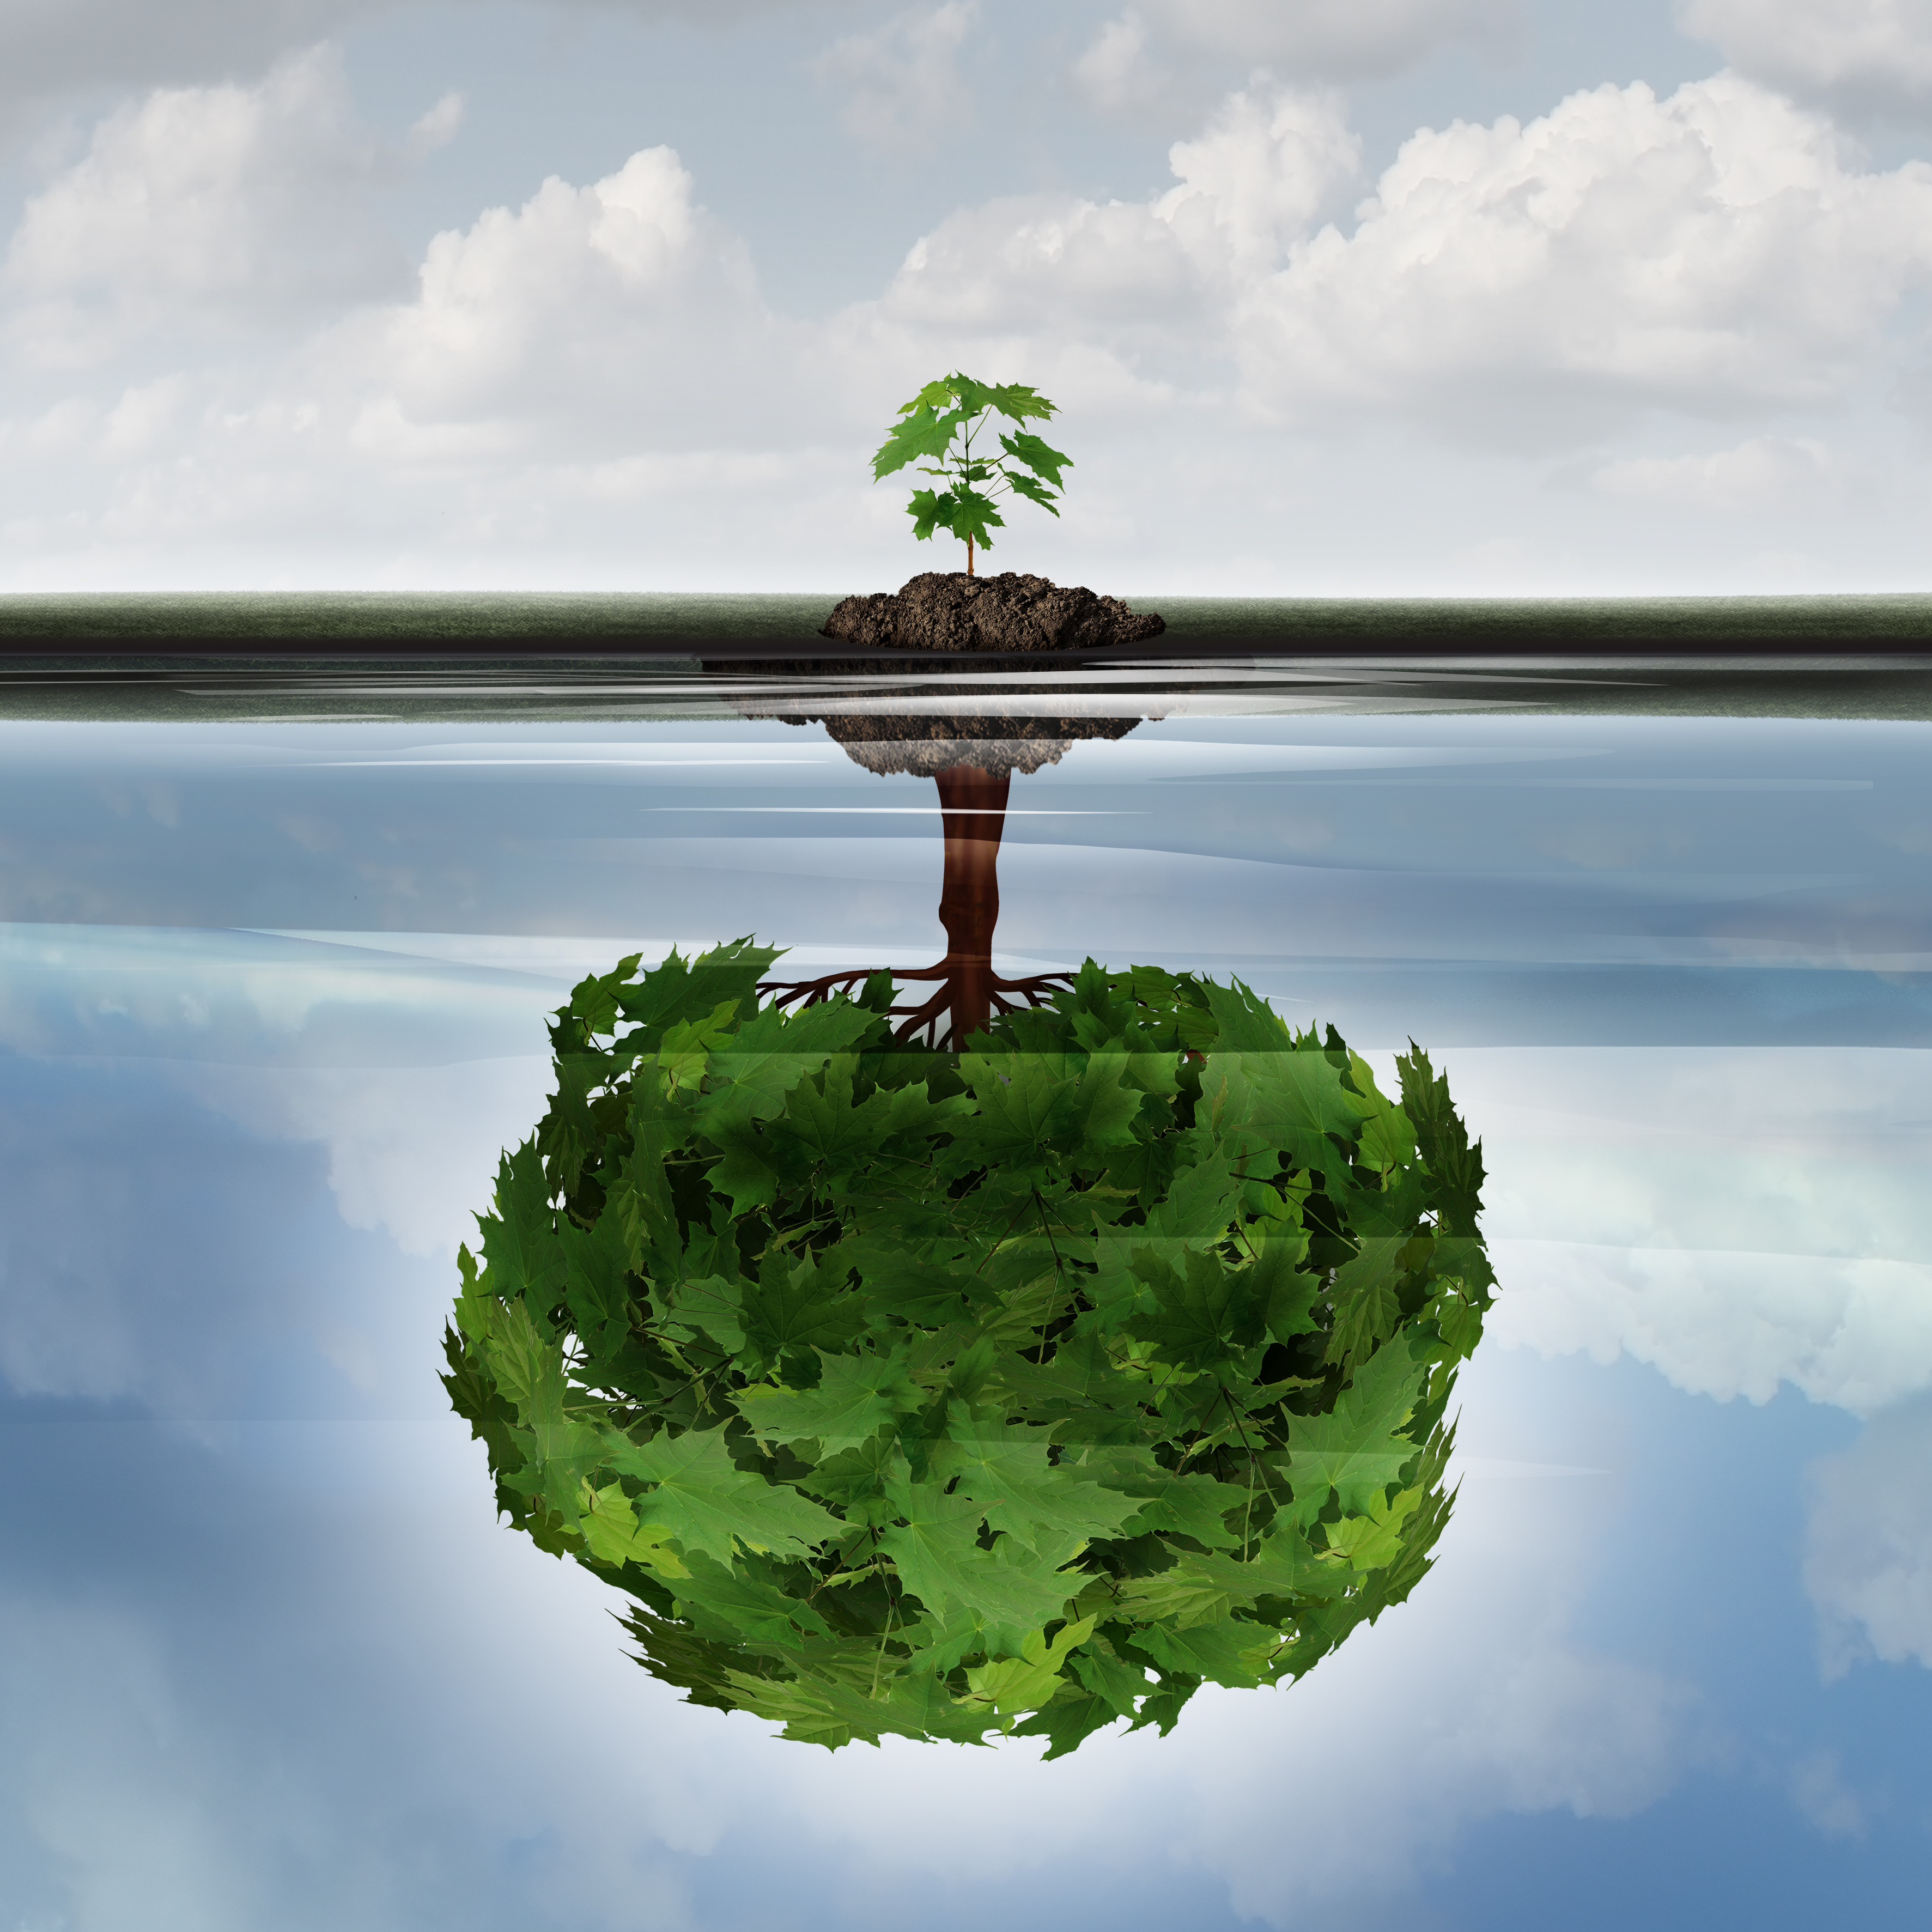 Potential success concept as a symbol for aspiration philosophy idea and determined growth motivation icon as a small young sappling making a reflection  of a mature large tree in the water with 3D illustration elements.